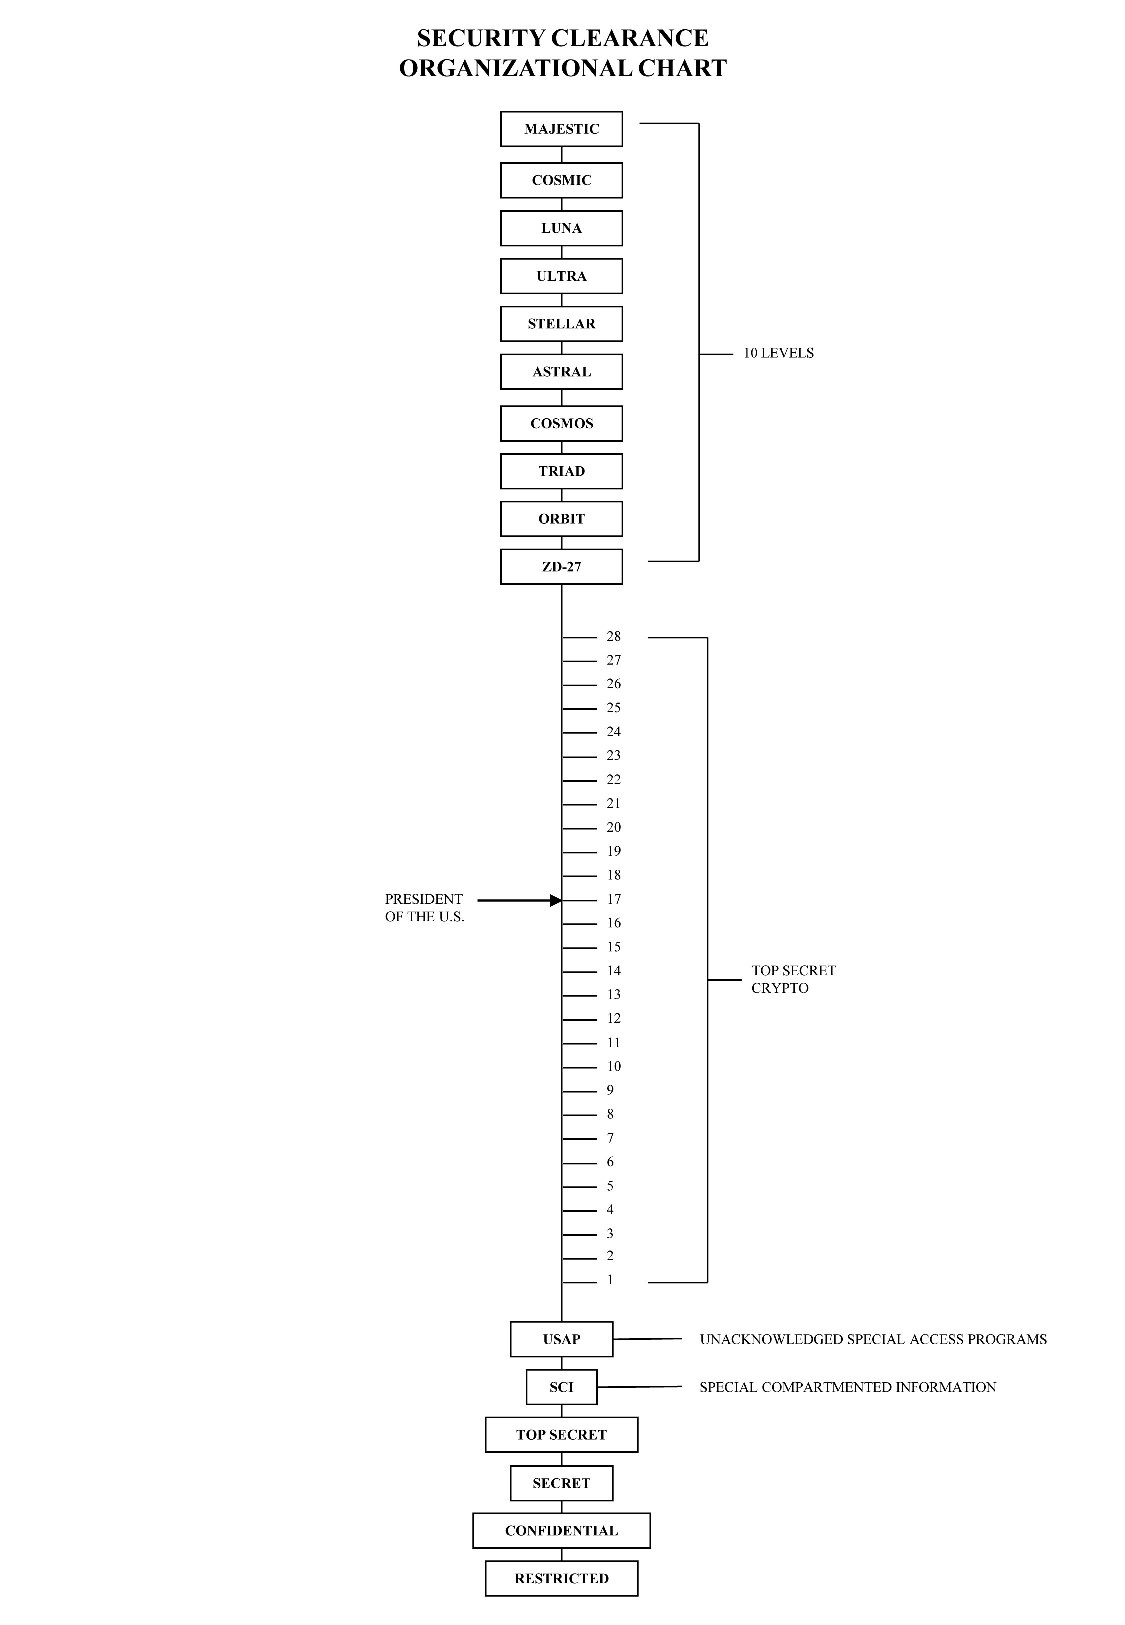 Security Clearance Organizational Chart